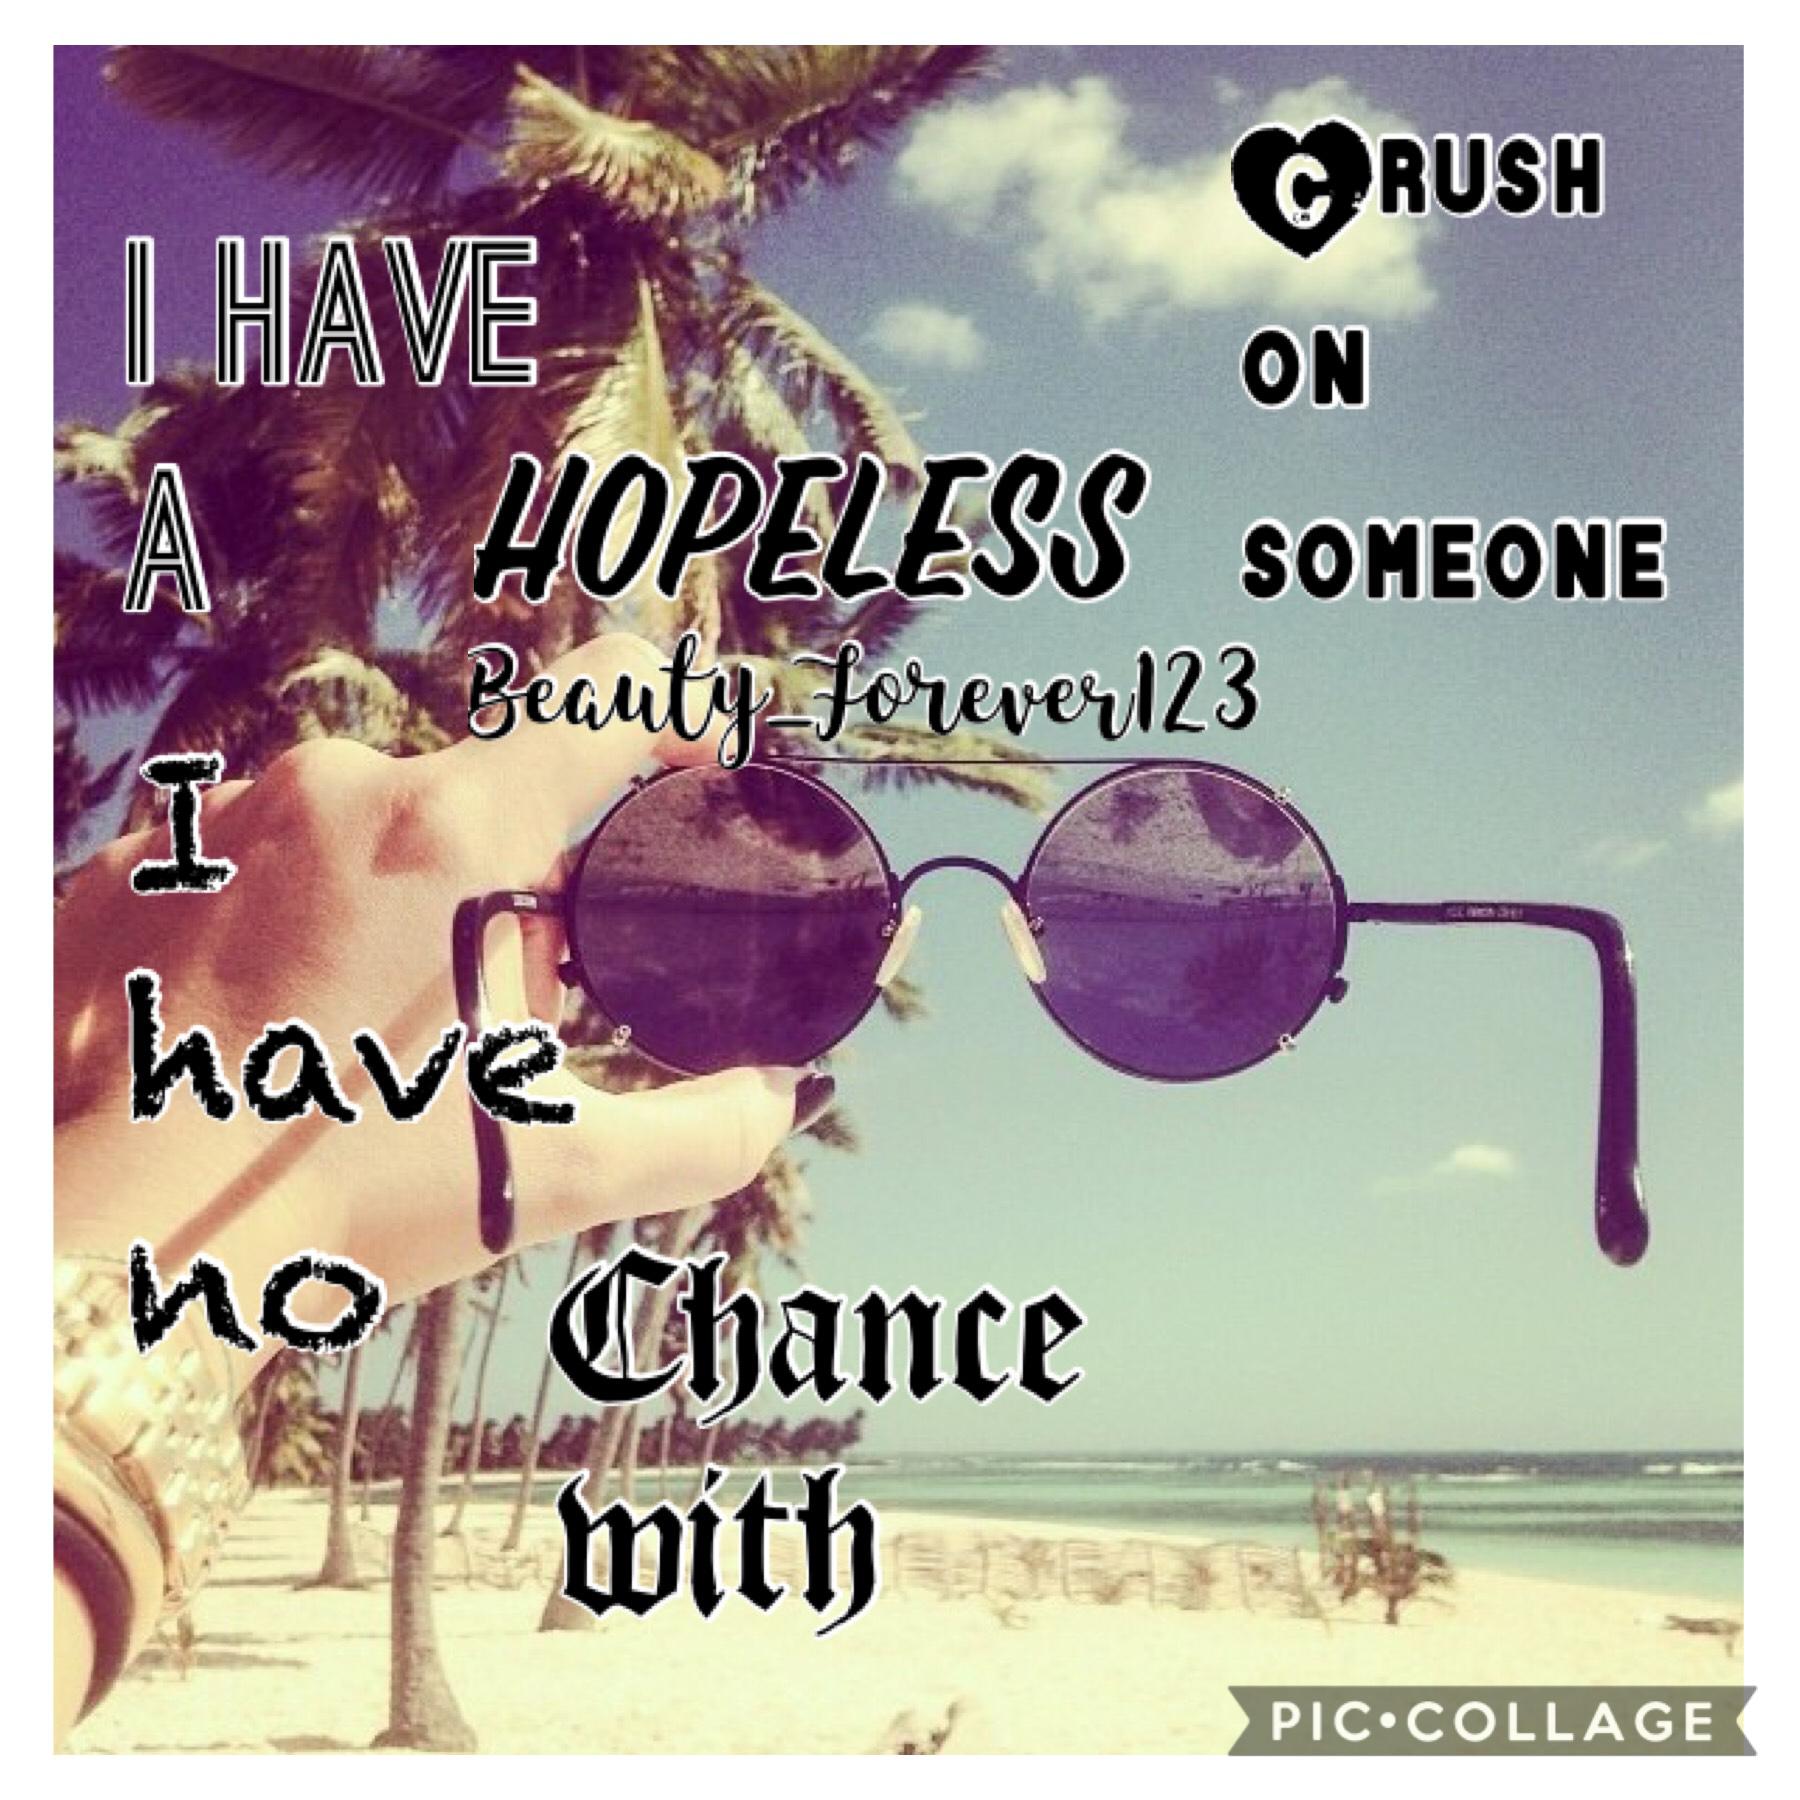 “ I have a hopeless crush on someone I have no chance with “ 
💋 M 💋